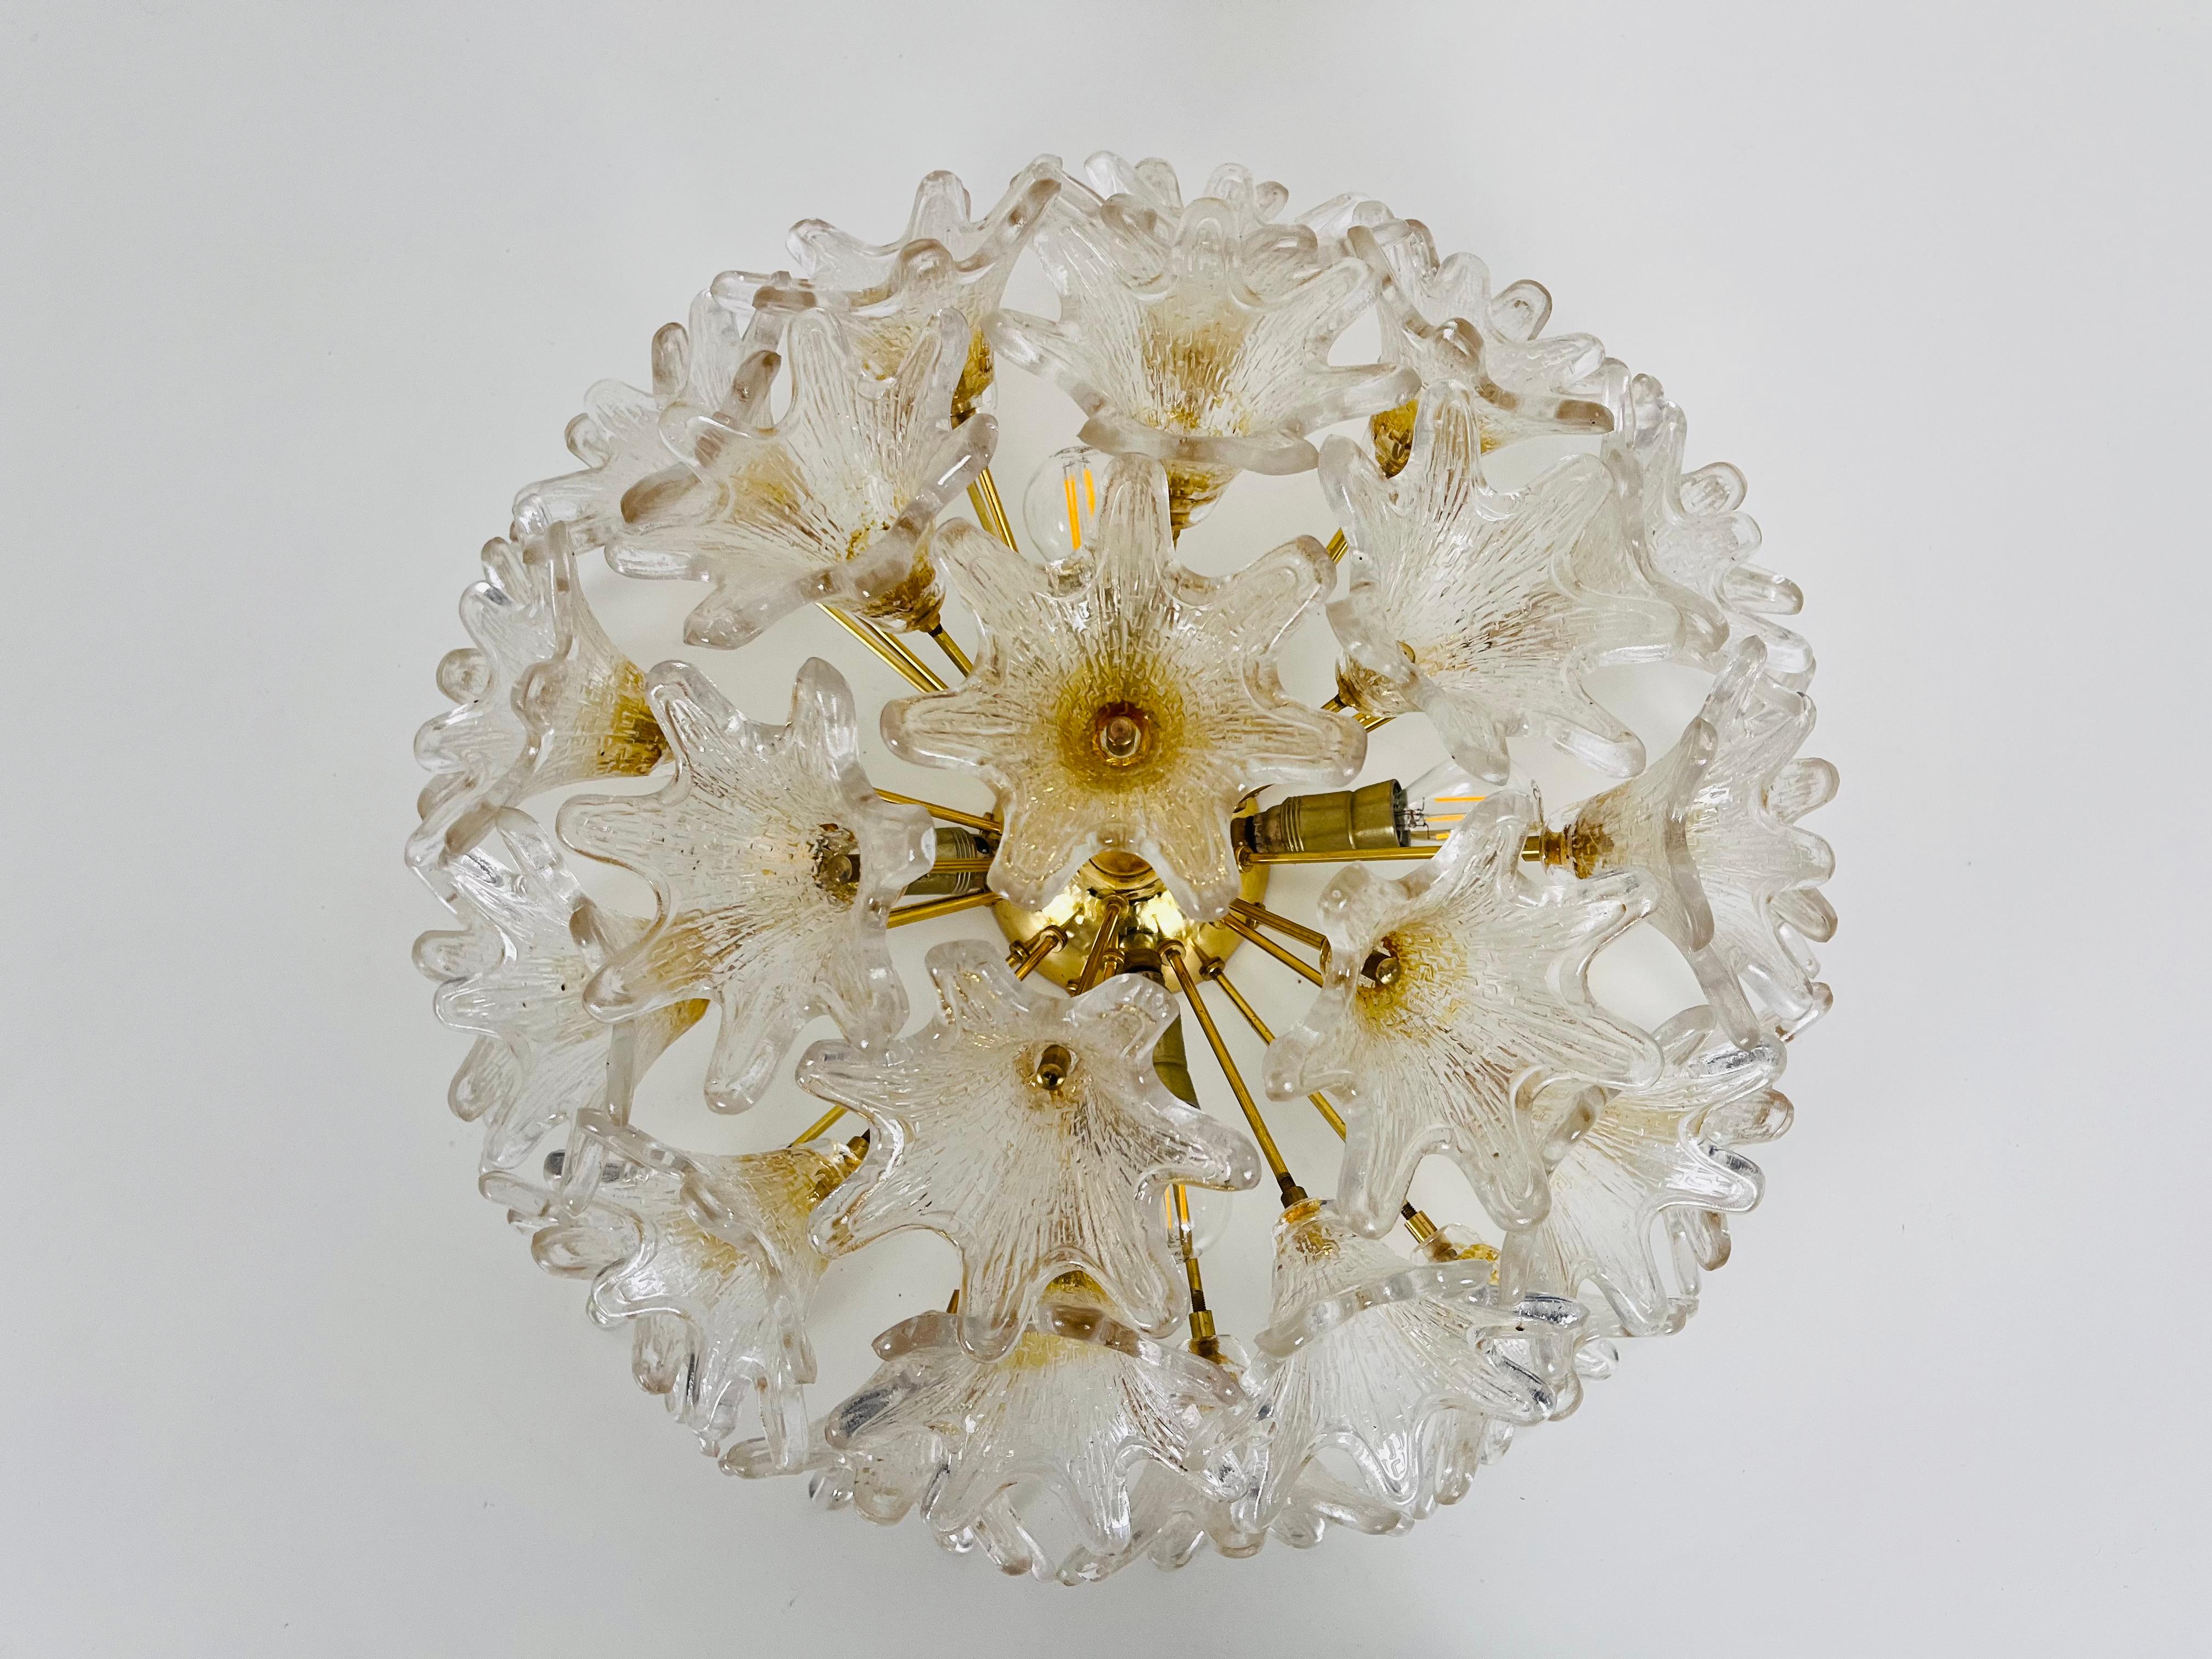 An extraordinary flushmount by Paolo Venini for VeArt made in Italy in the 1960s. The glass elements have a beautiful flower shape and are made of murano glass. The body of the lighting is made of polished brass.

The light requires E14 light